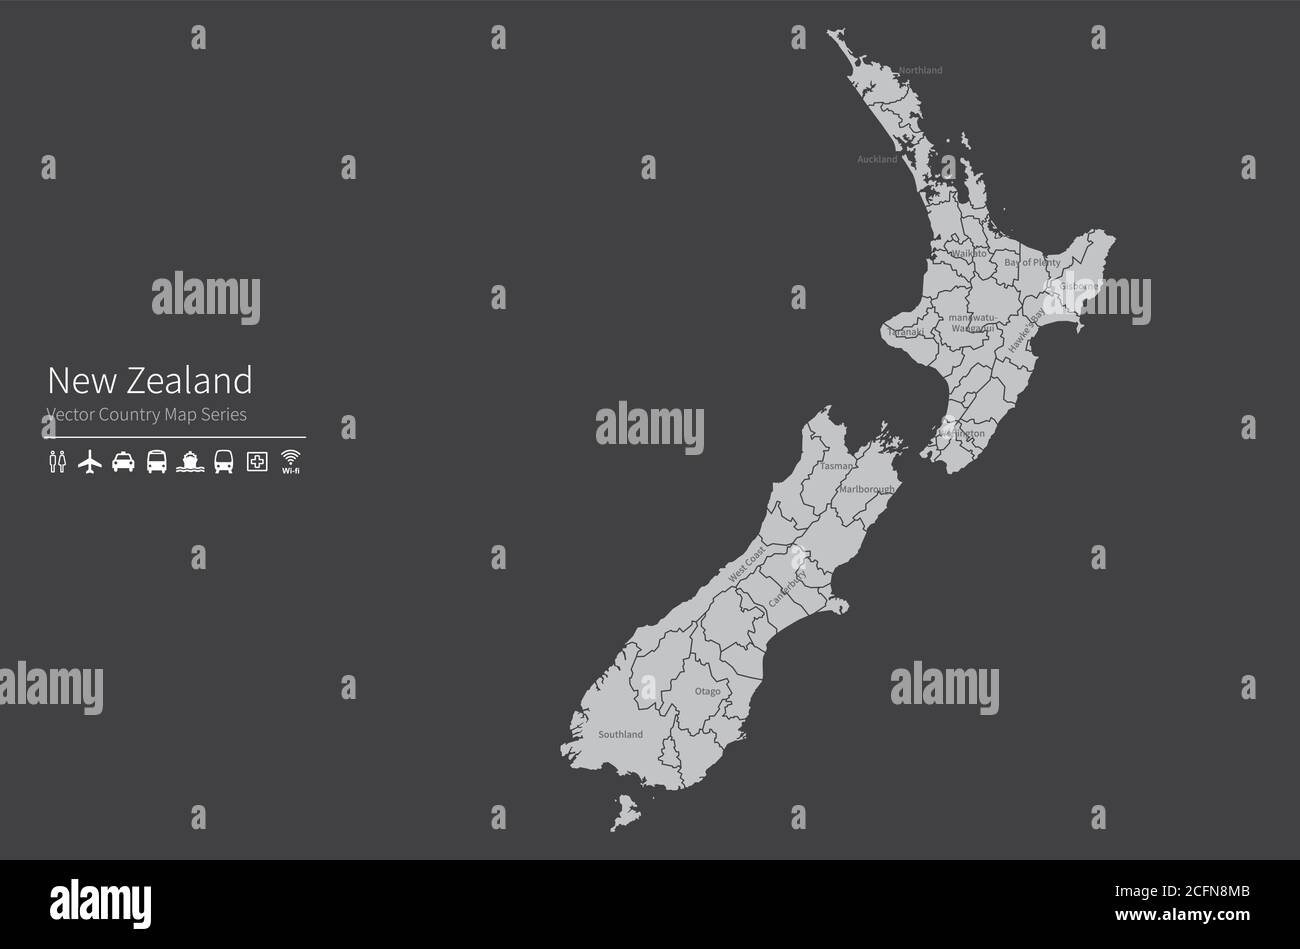 New zealand map. National map of the world. Gray colored countries map series. Stock Vector